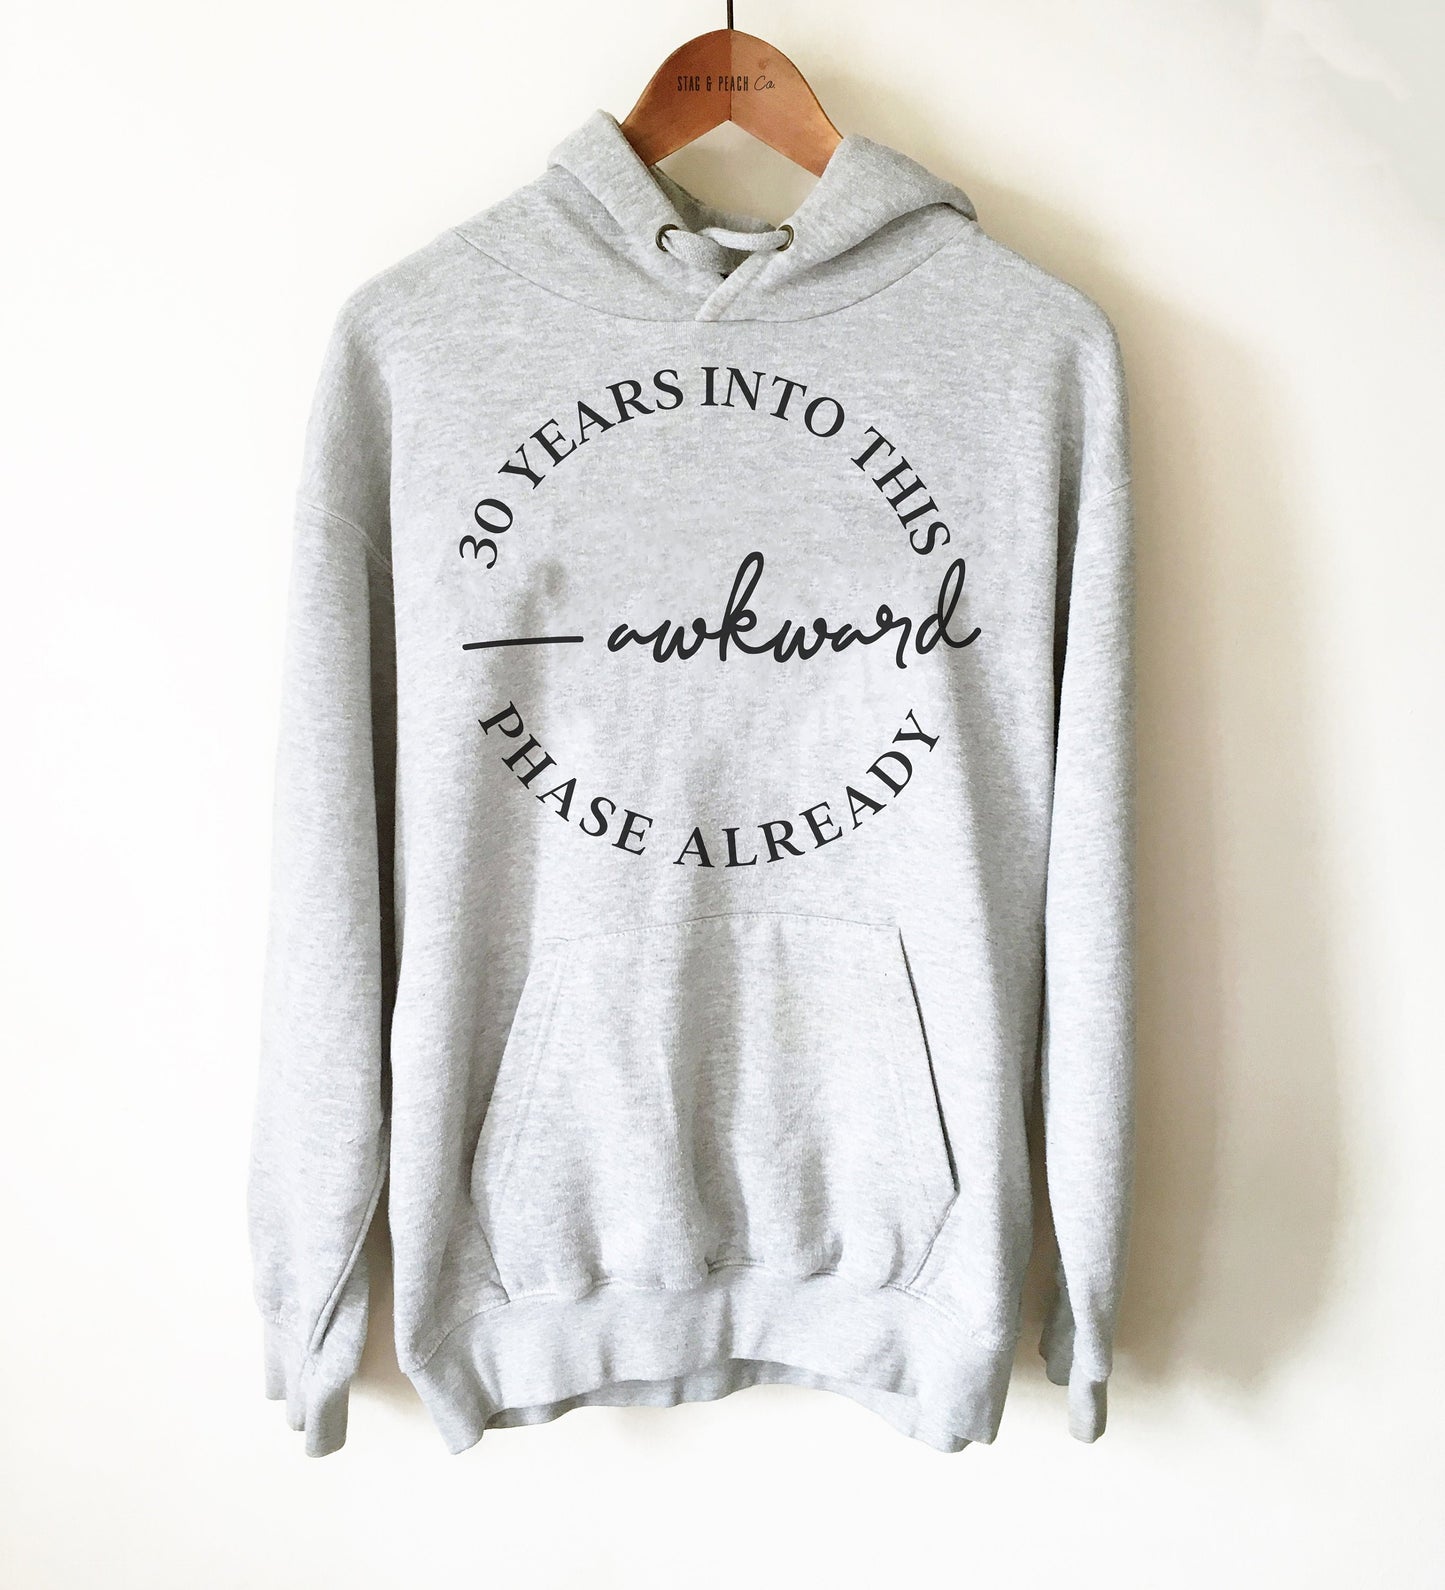 30 Years Into This Awkward Phase Unisex Hoodie